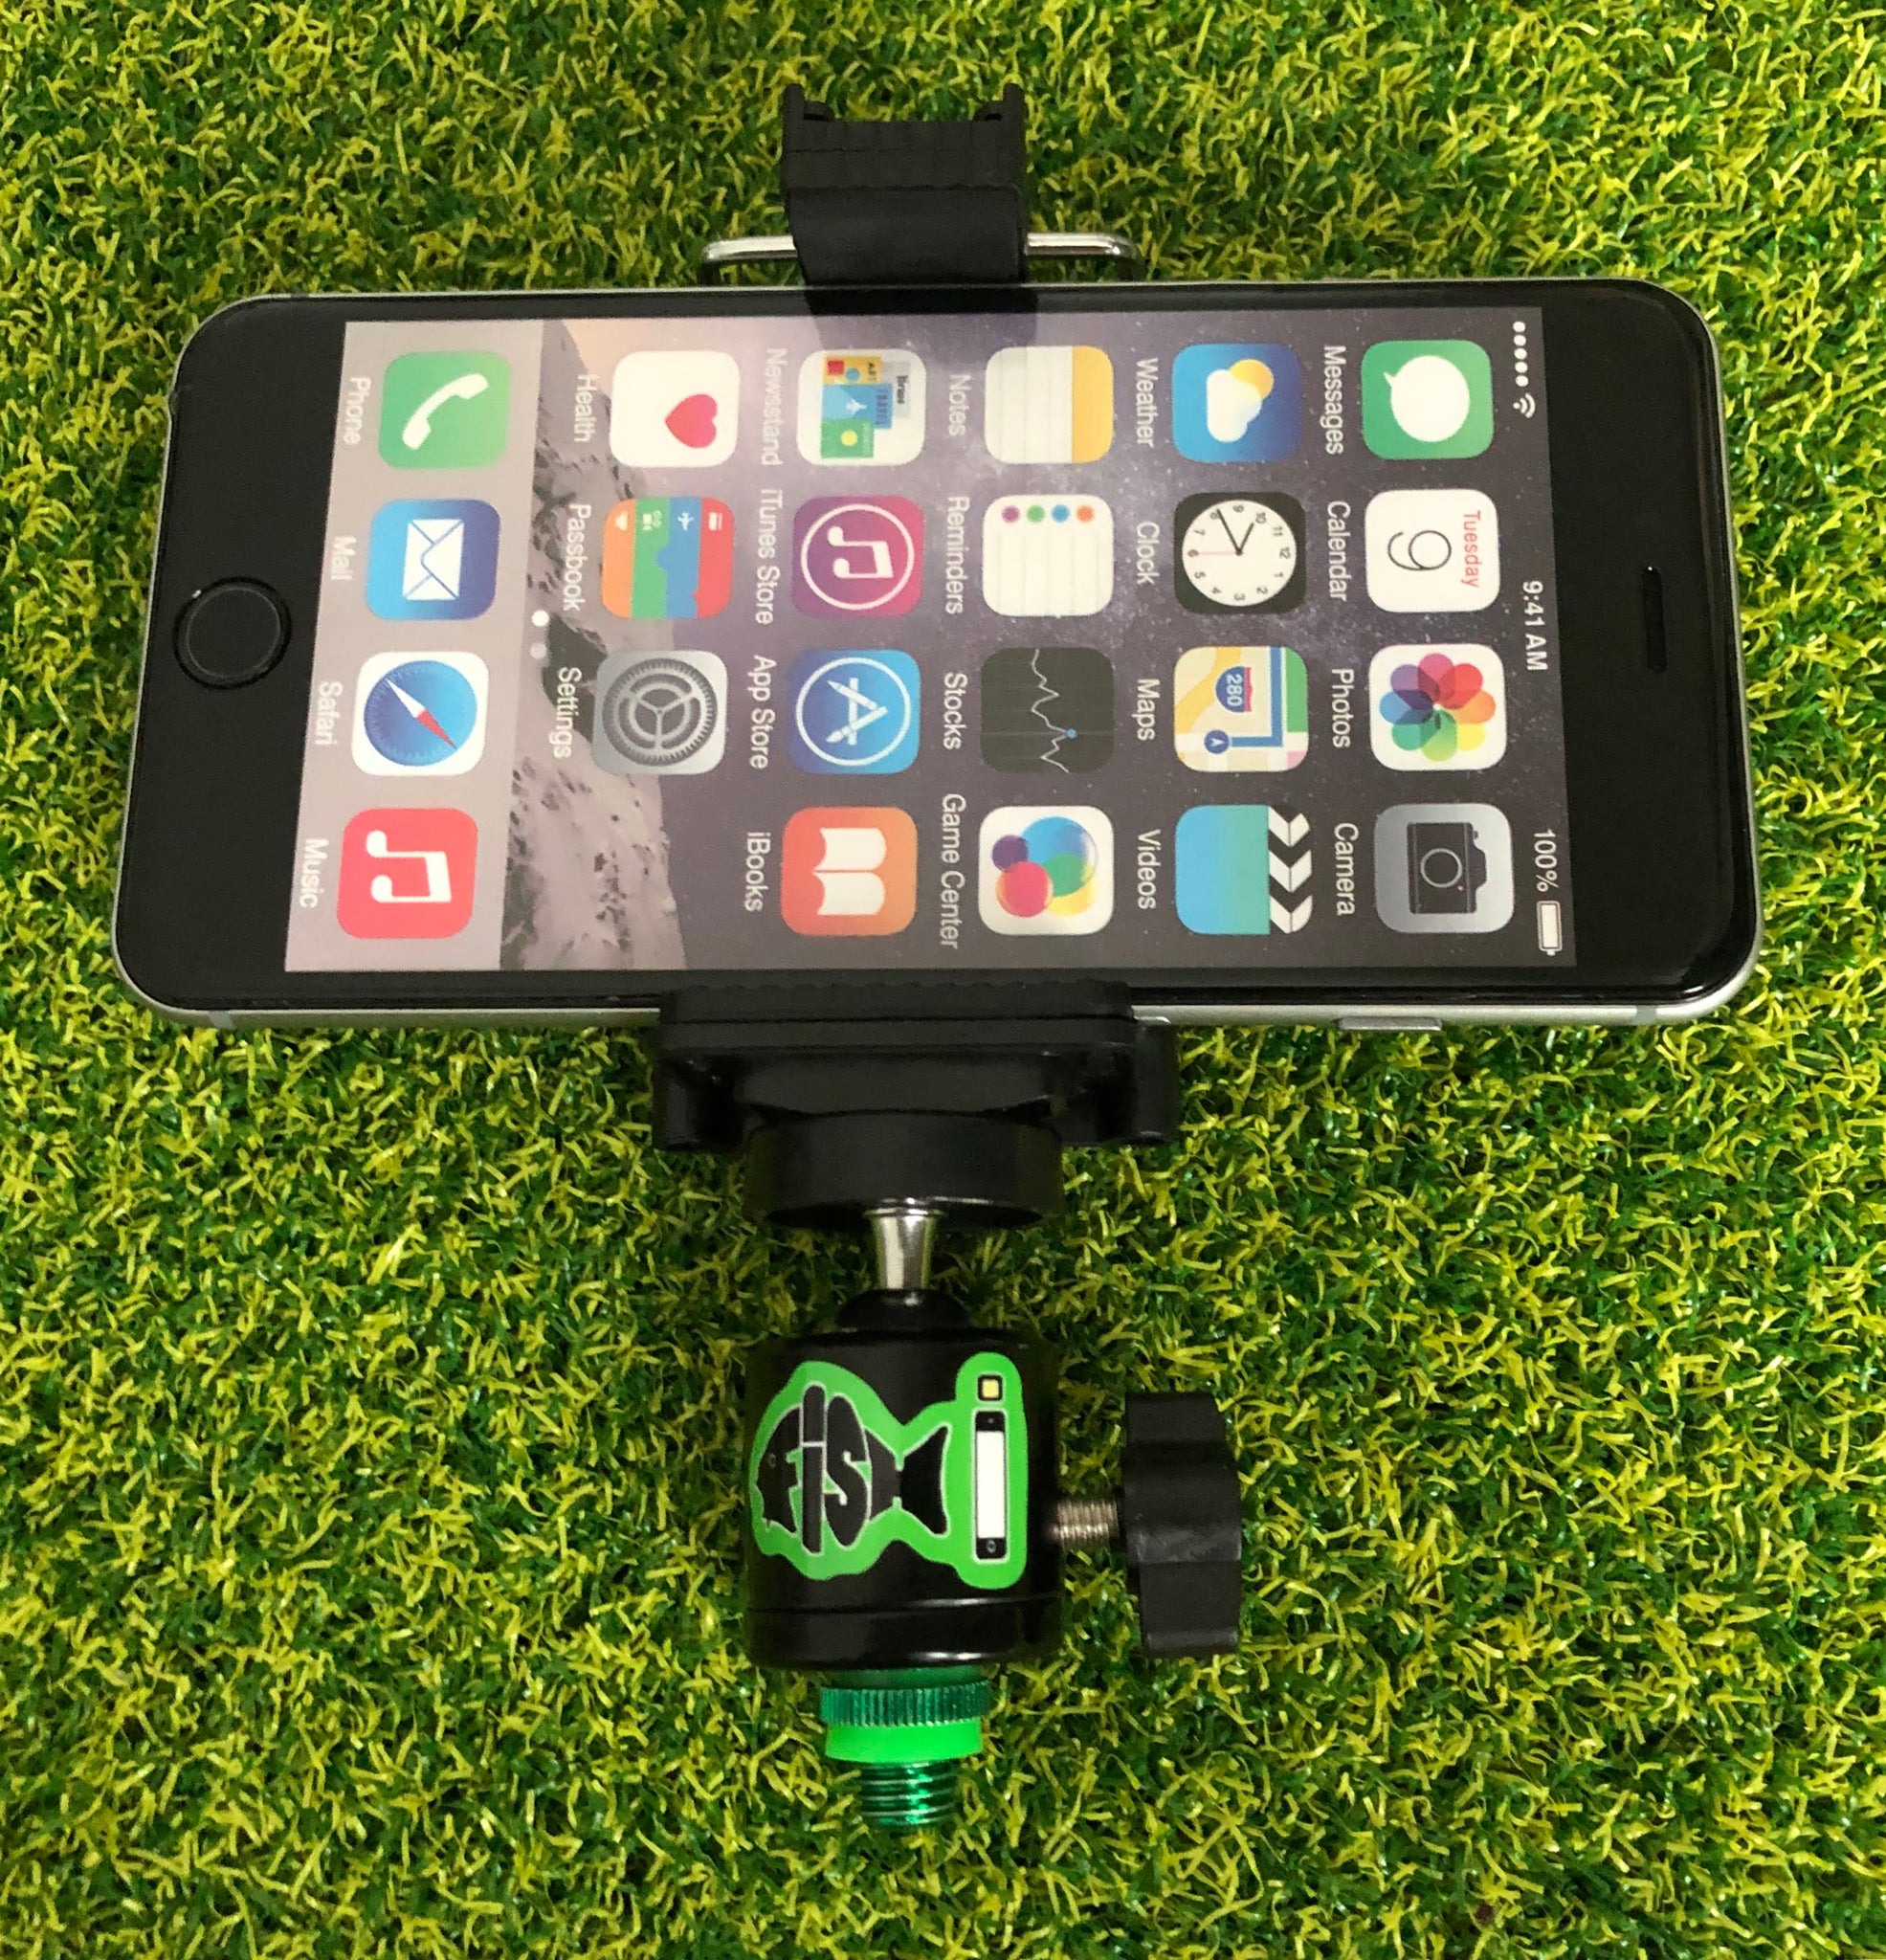 FiSH i Phone Holder With Cold Shoe Mount & Bluetooth Remote. – FiSH i UK